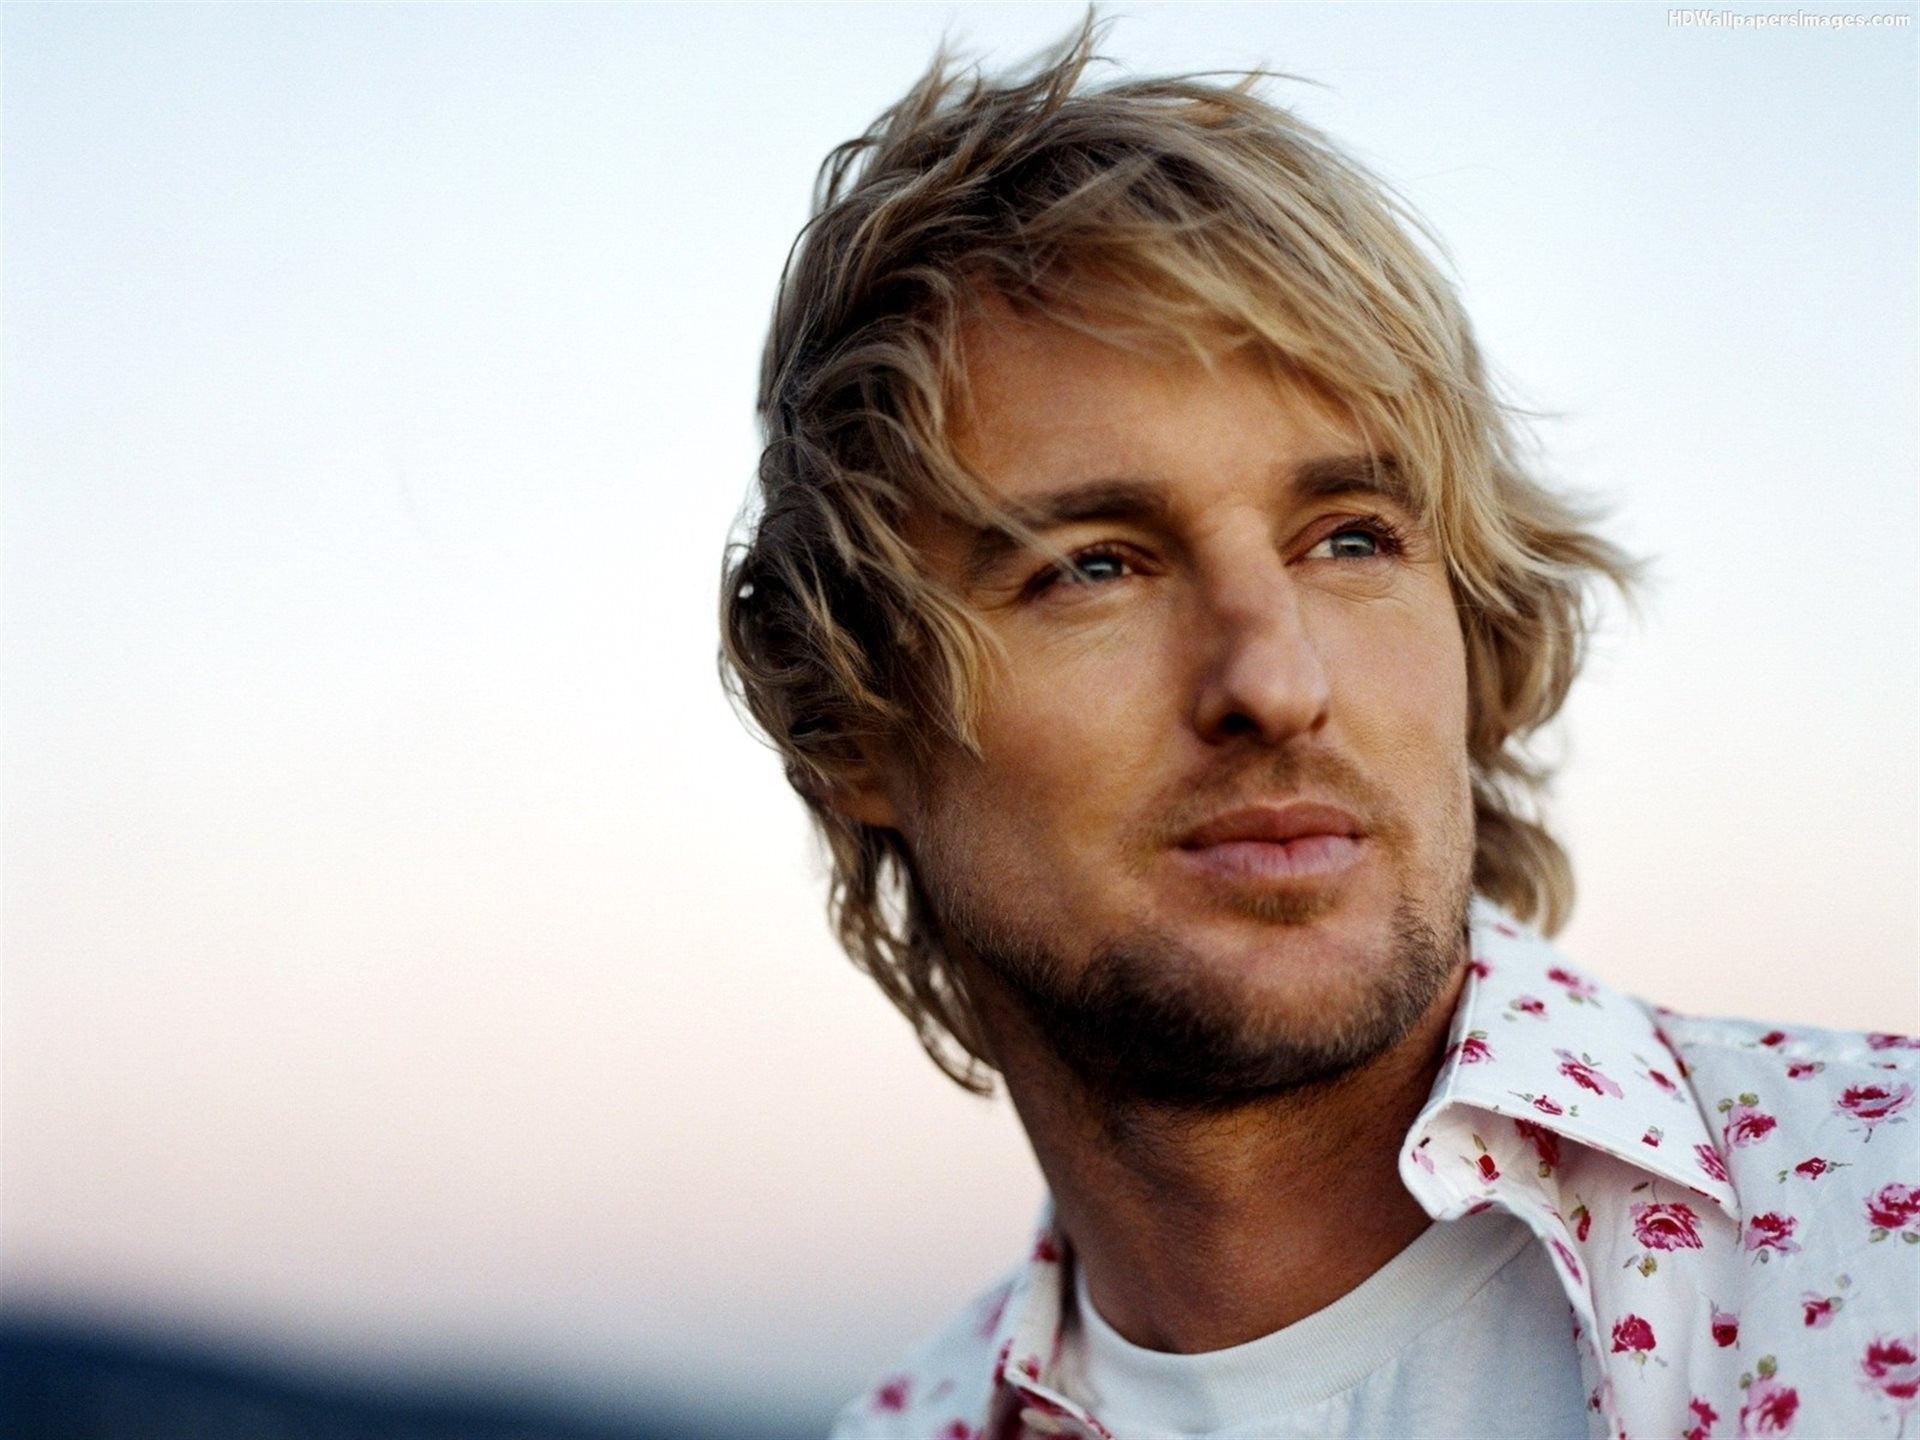 A portrait of Owen Wilson with a beard and wearing a white shirt.